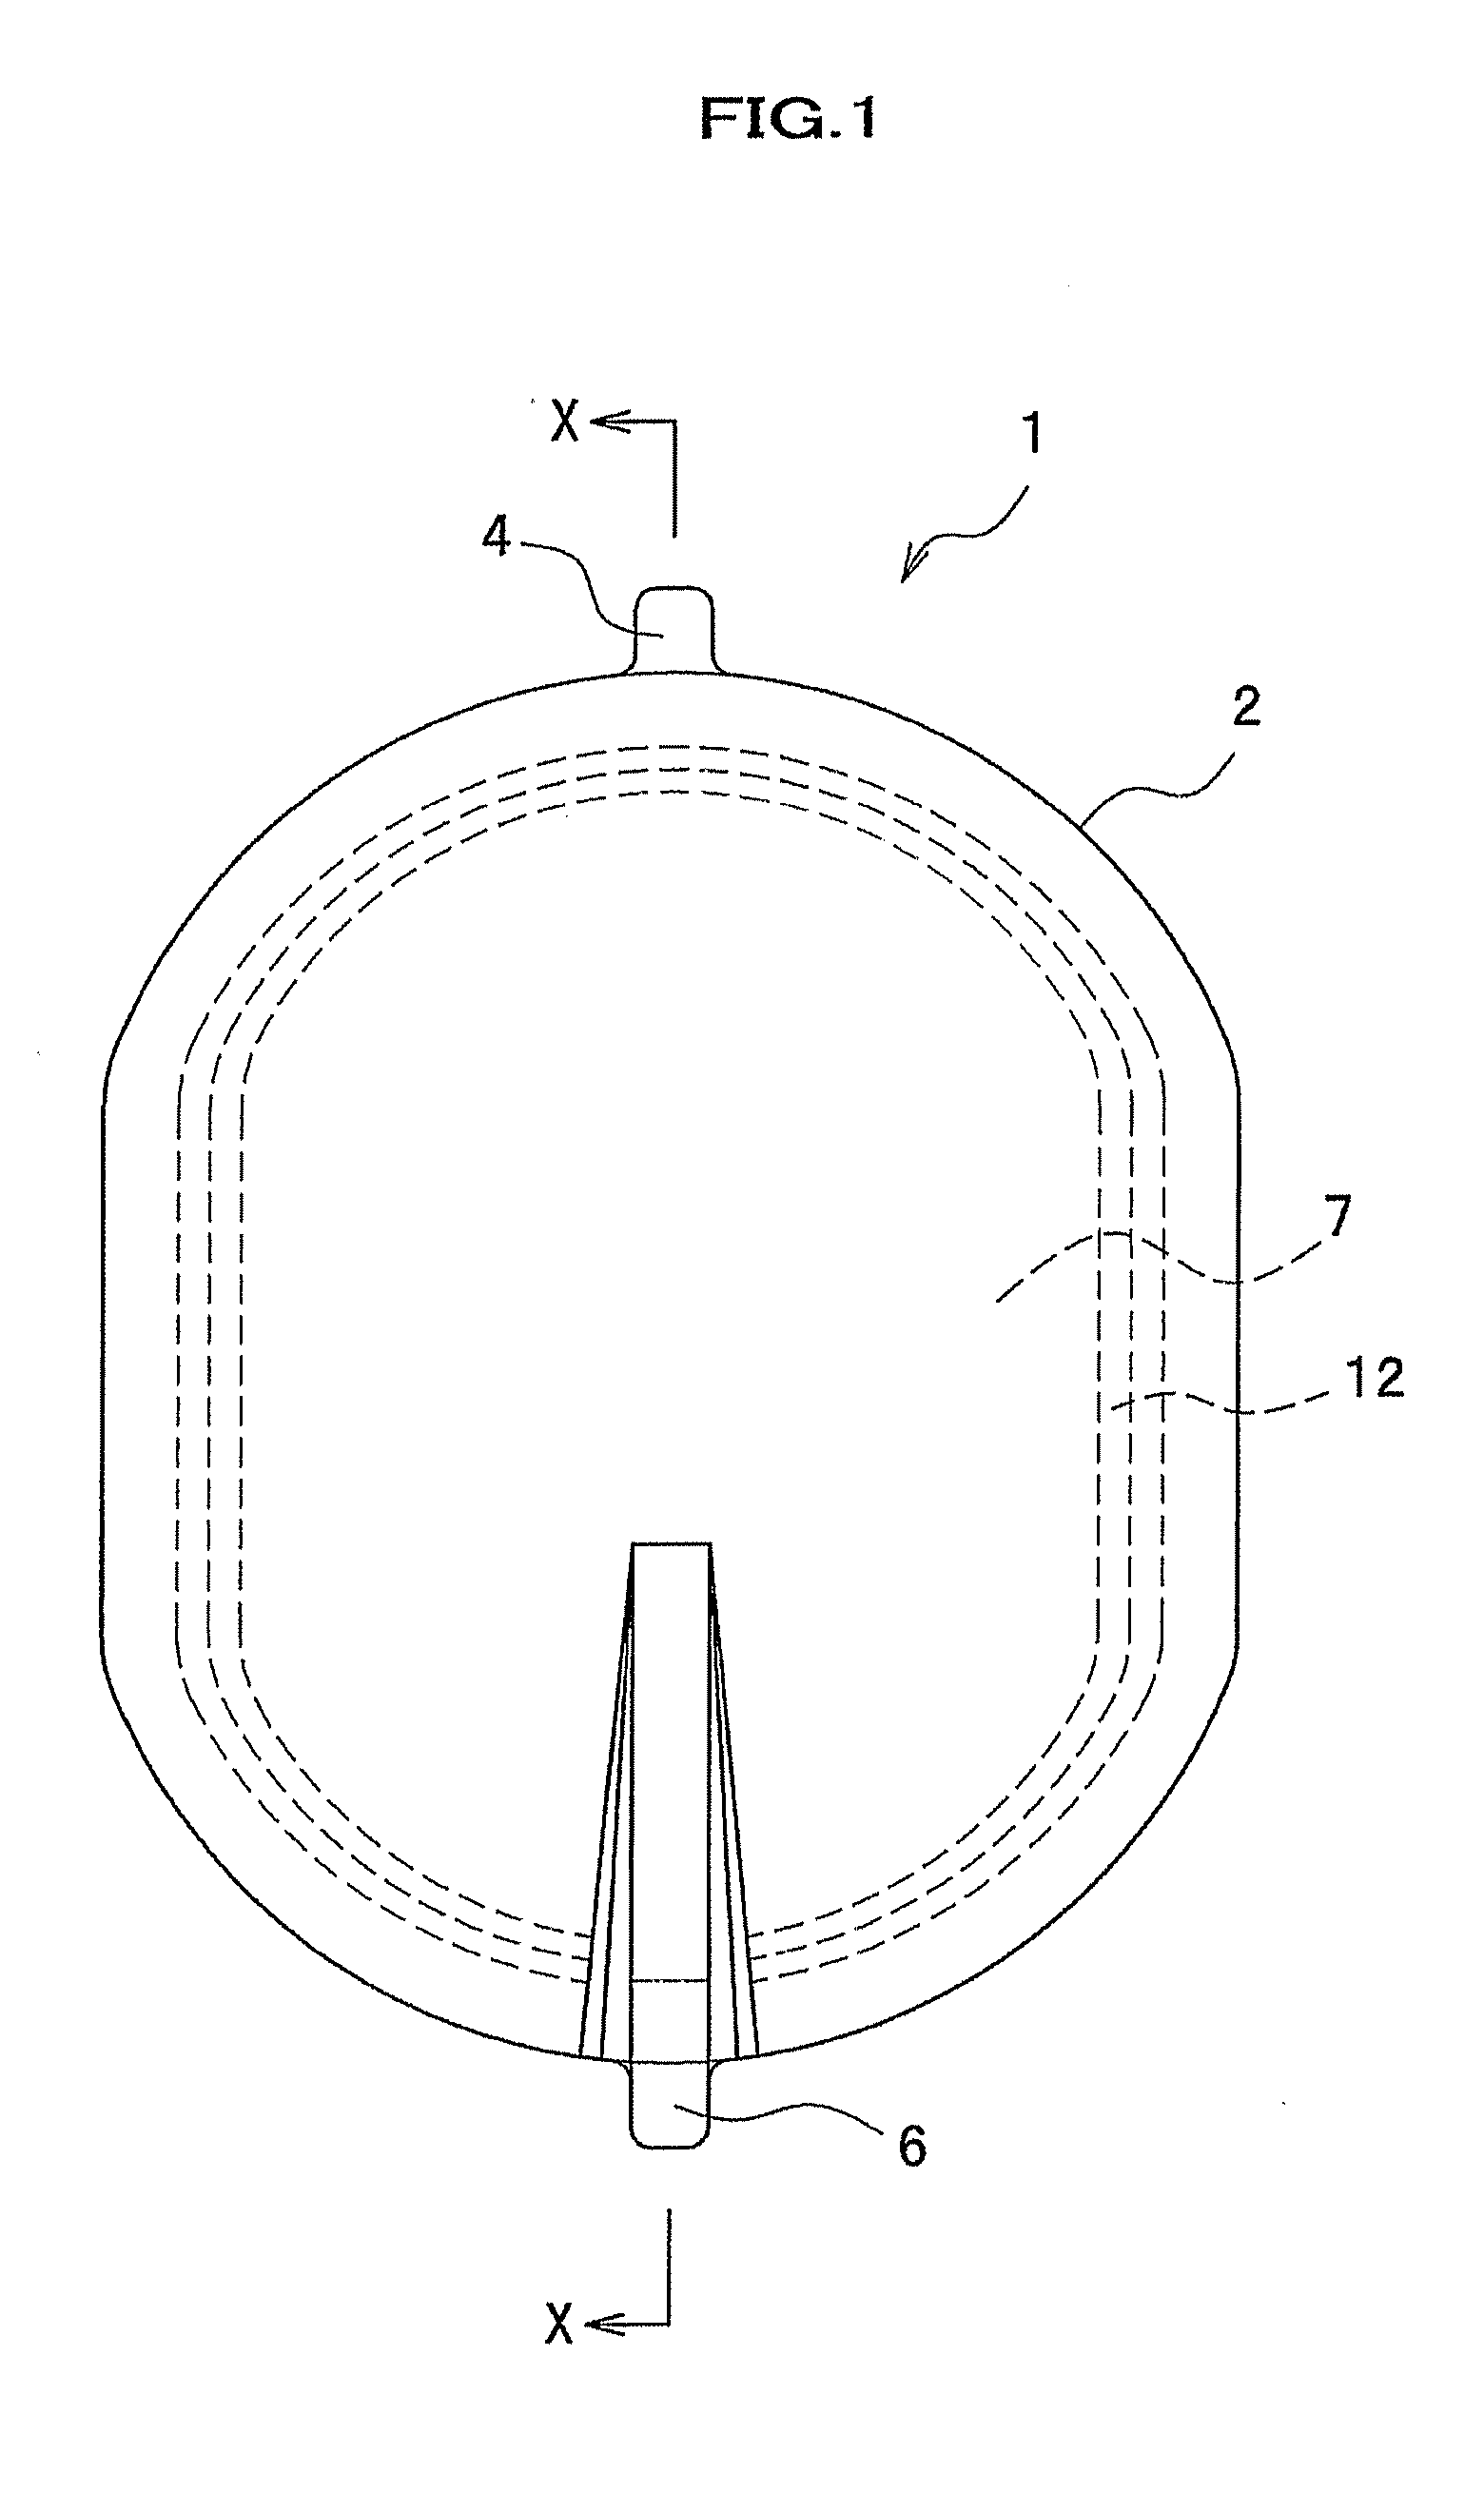 Blood treatment filter and blood treatment circuit